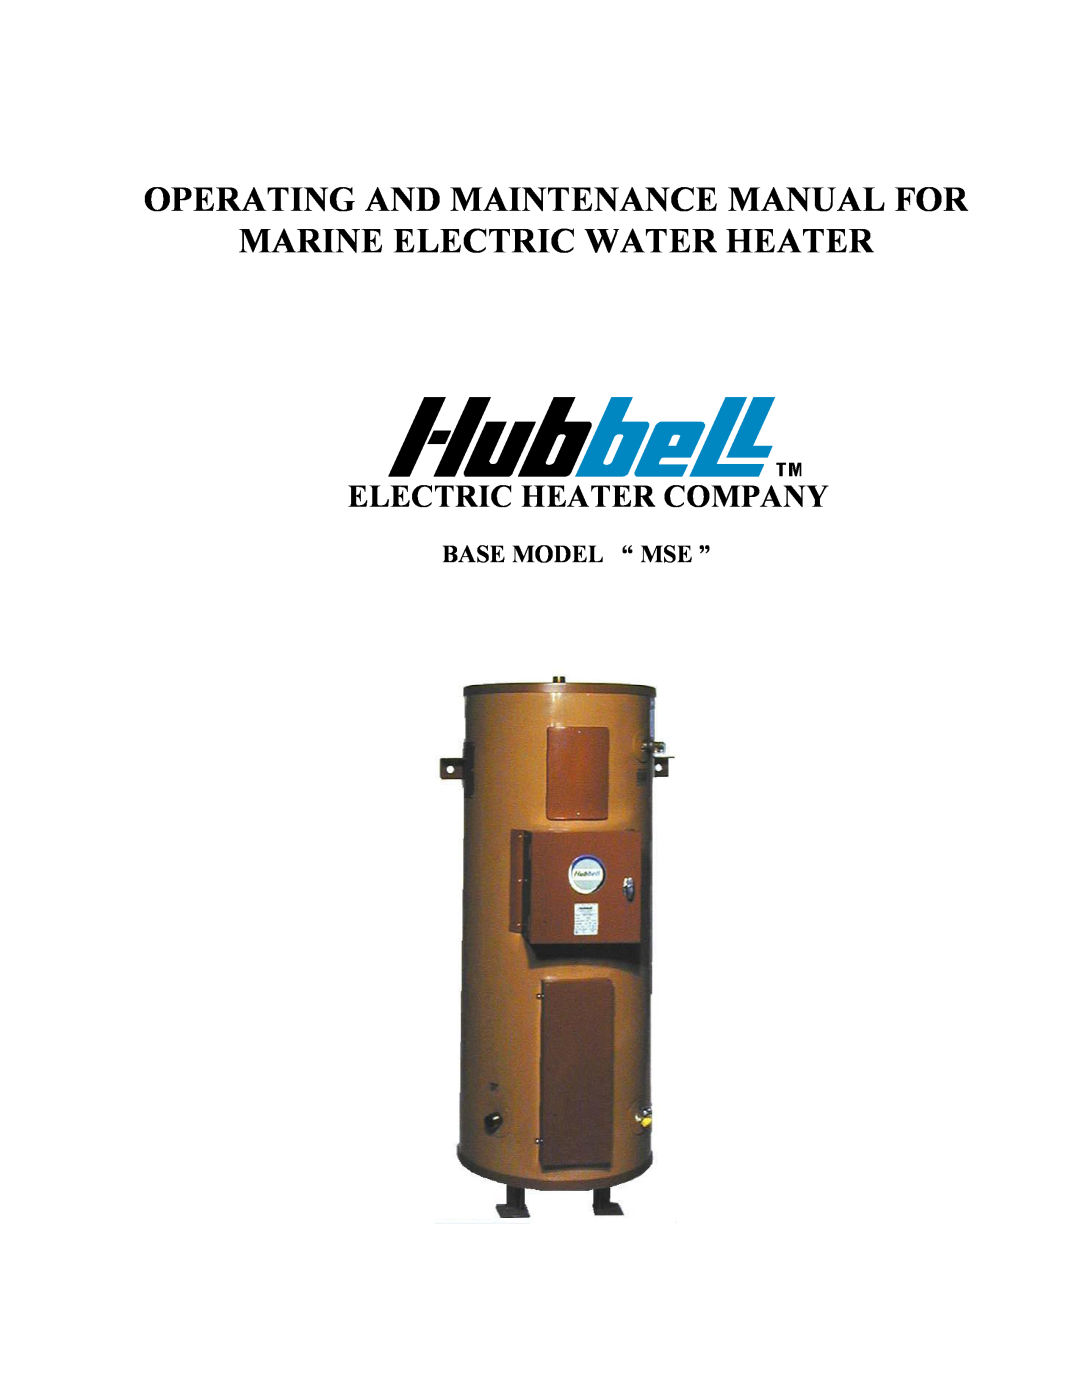 Hubbell Electric Heater Company MSE manual Base Model “ Mse ”, Operating And Maintenance Manual For 